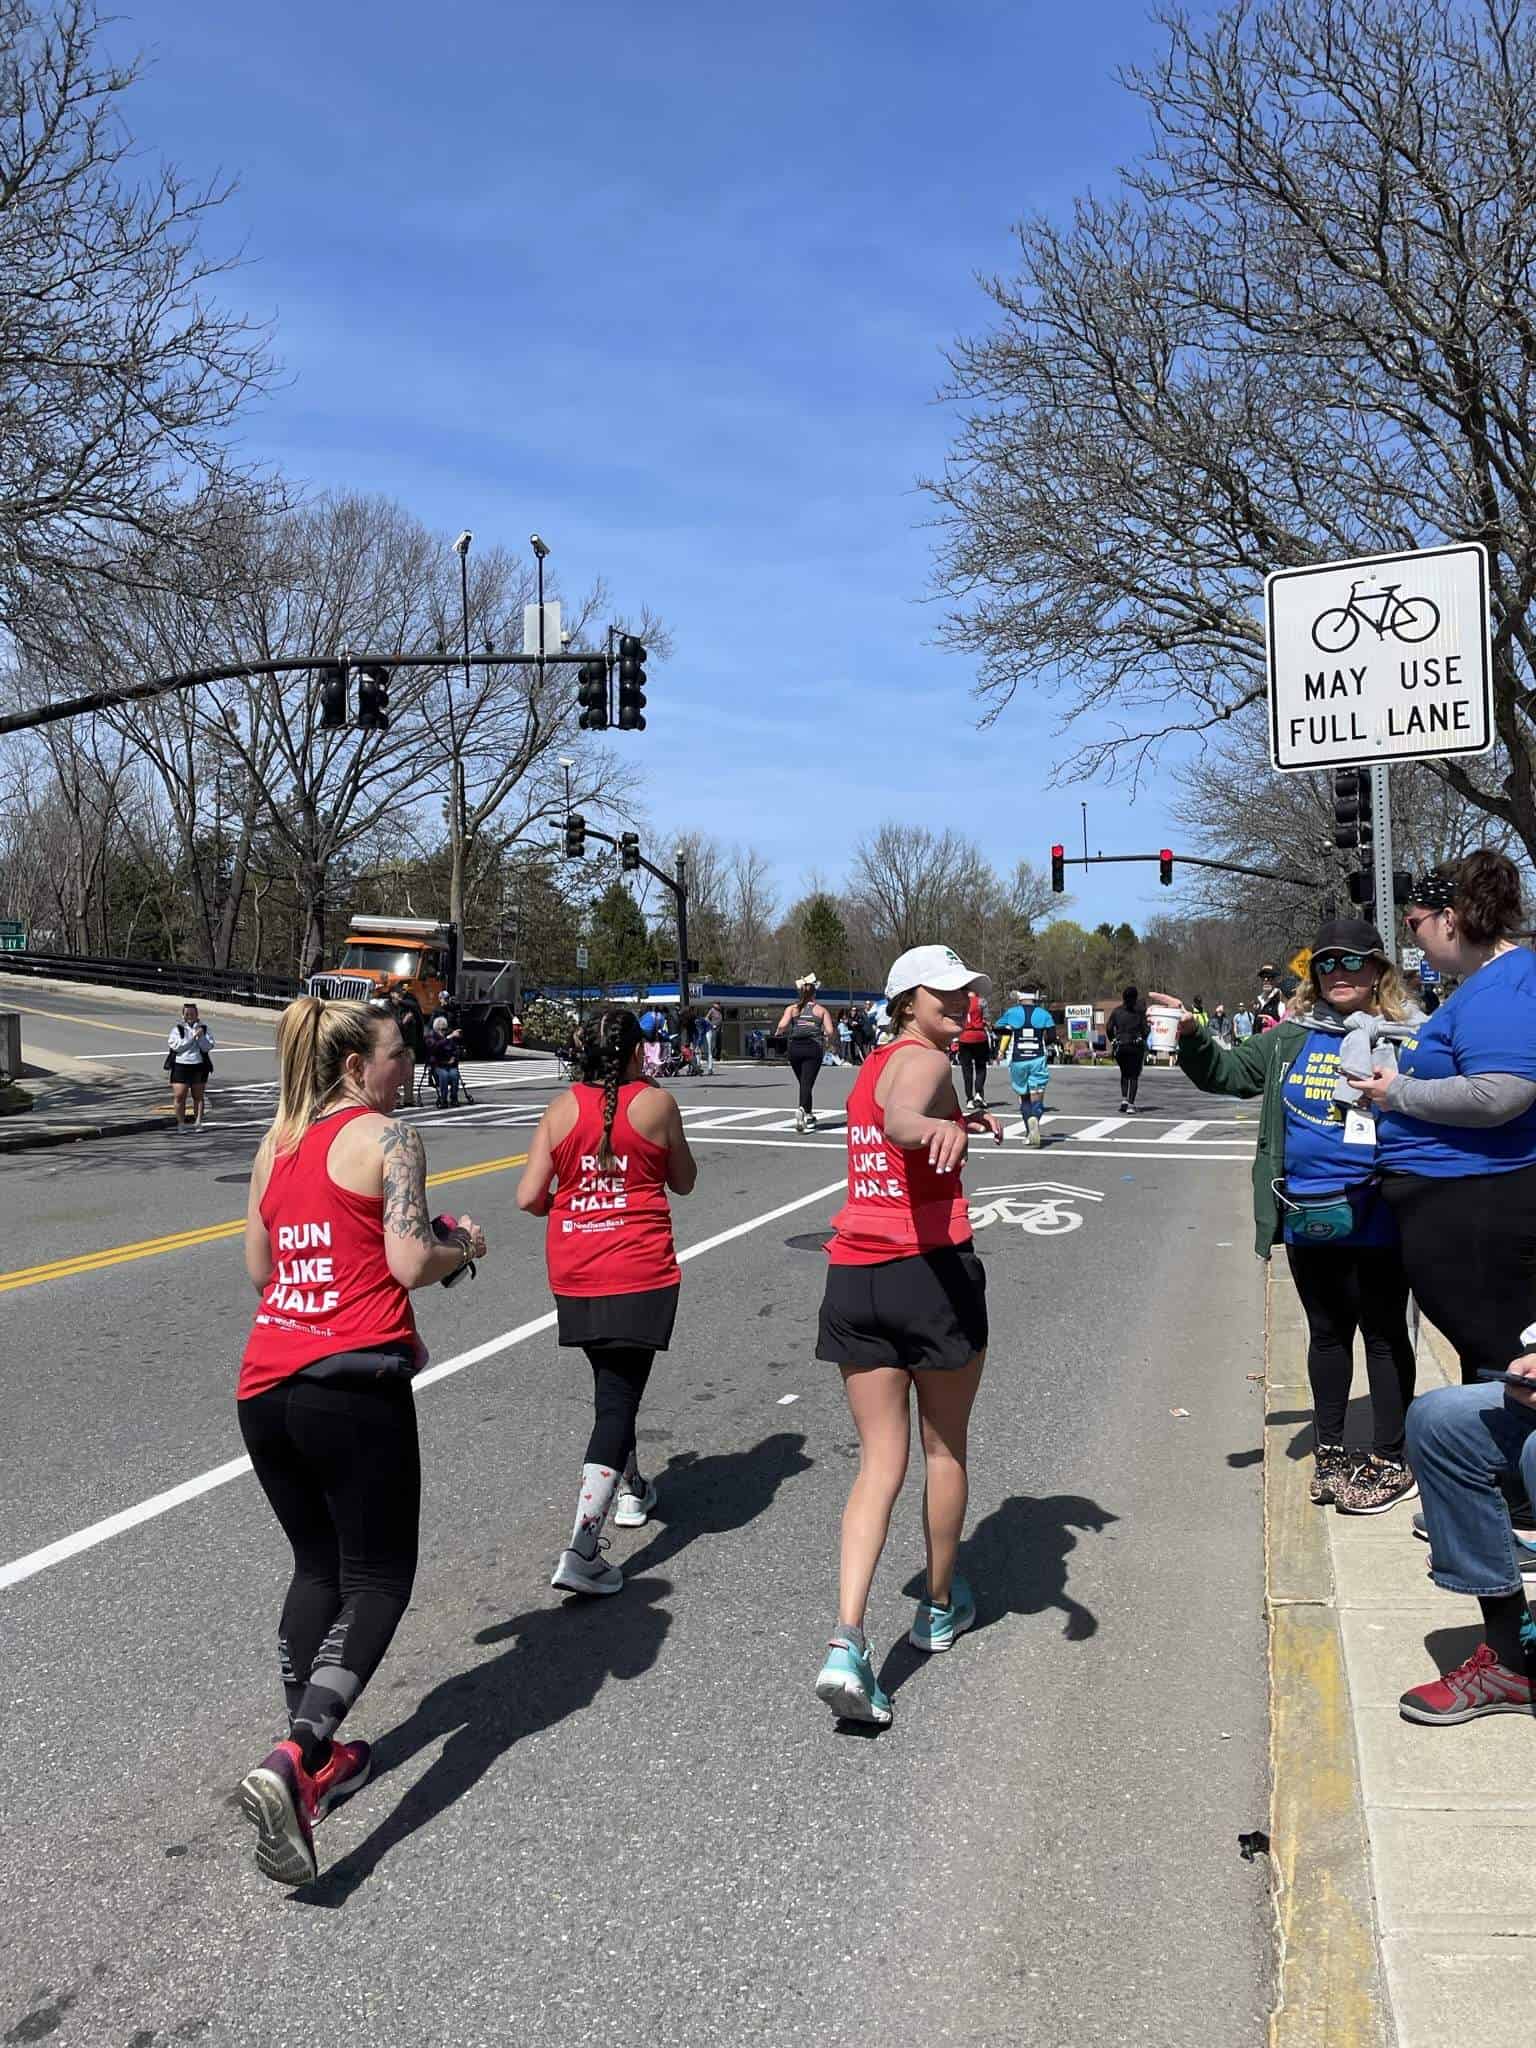 Runners complete the Boston Marathon together